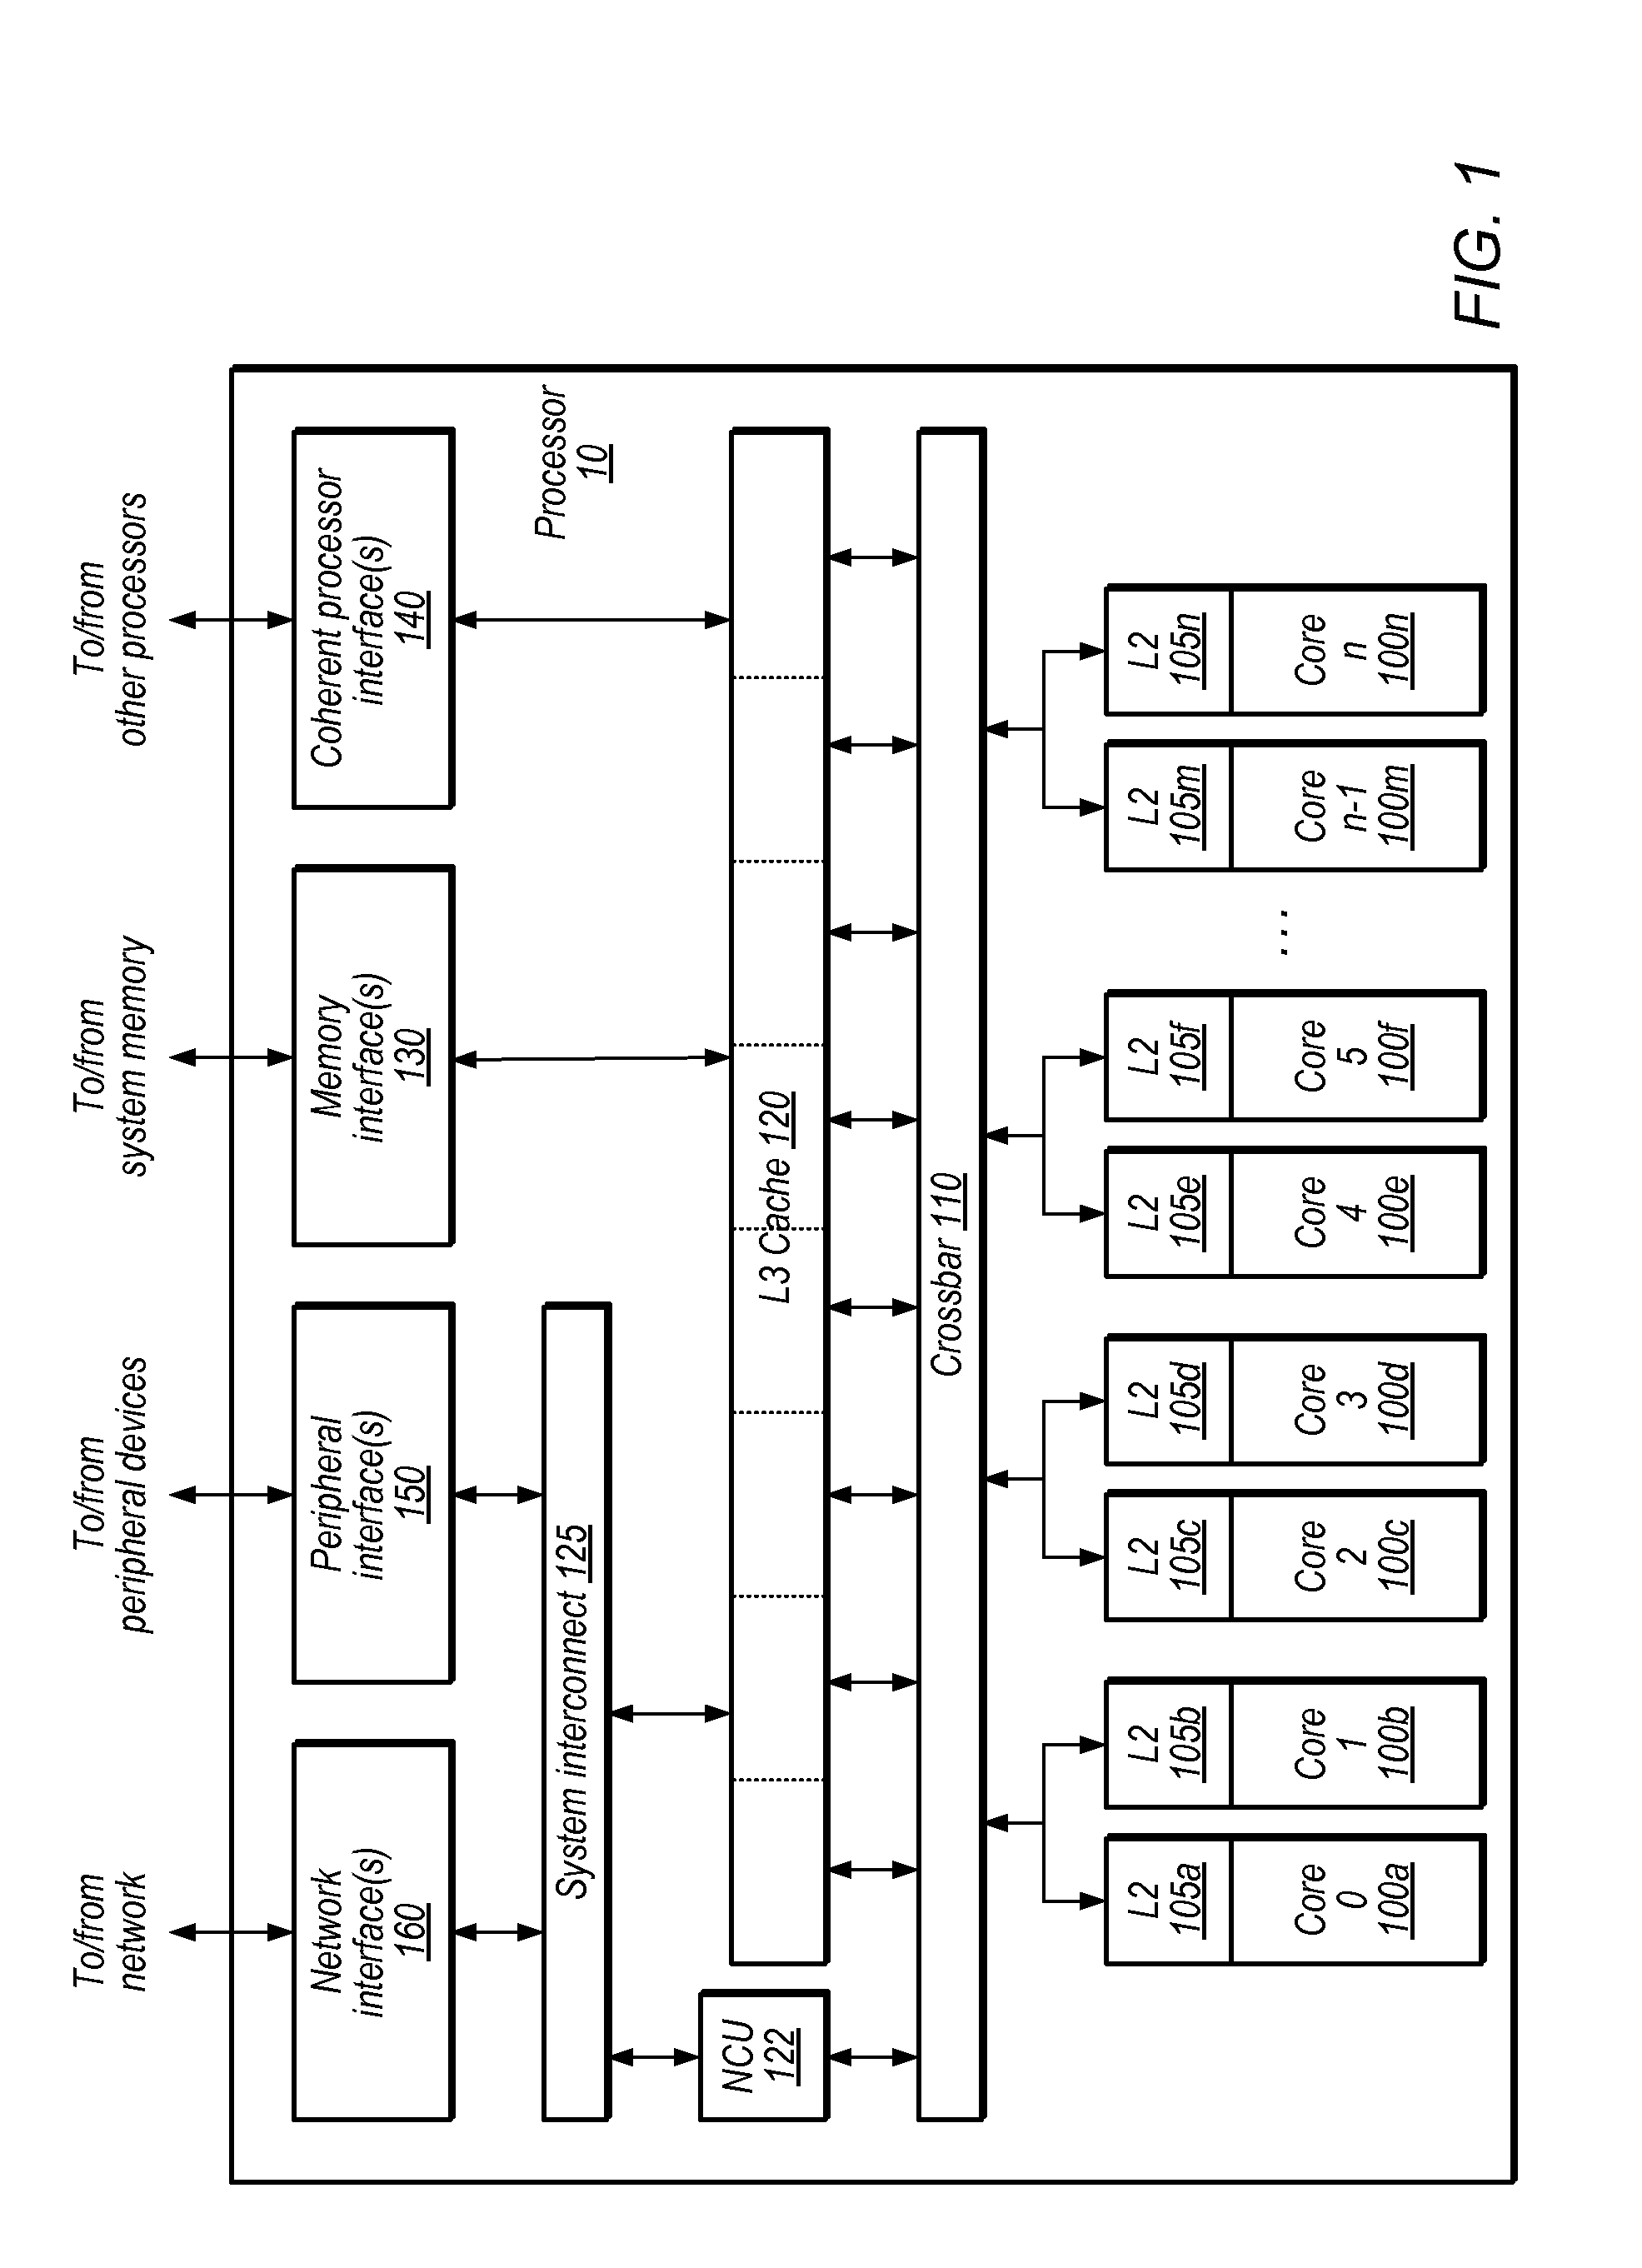 System and Method to Manage Address Translation Requests